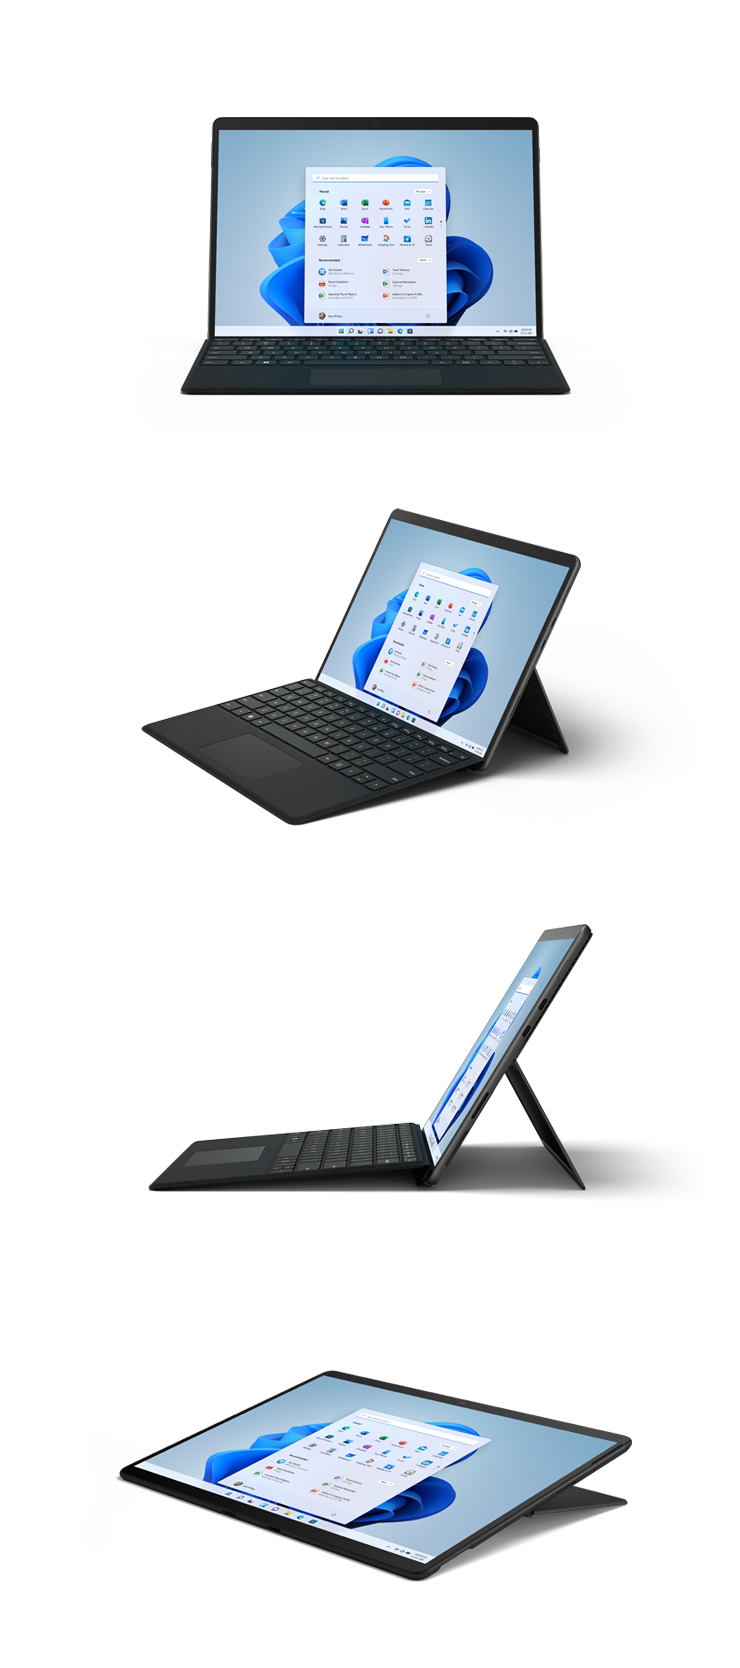 Renders of a Graphite Surface Pro 8 from straight on, angled, side view and studio mode.